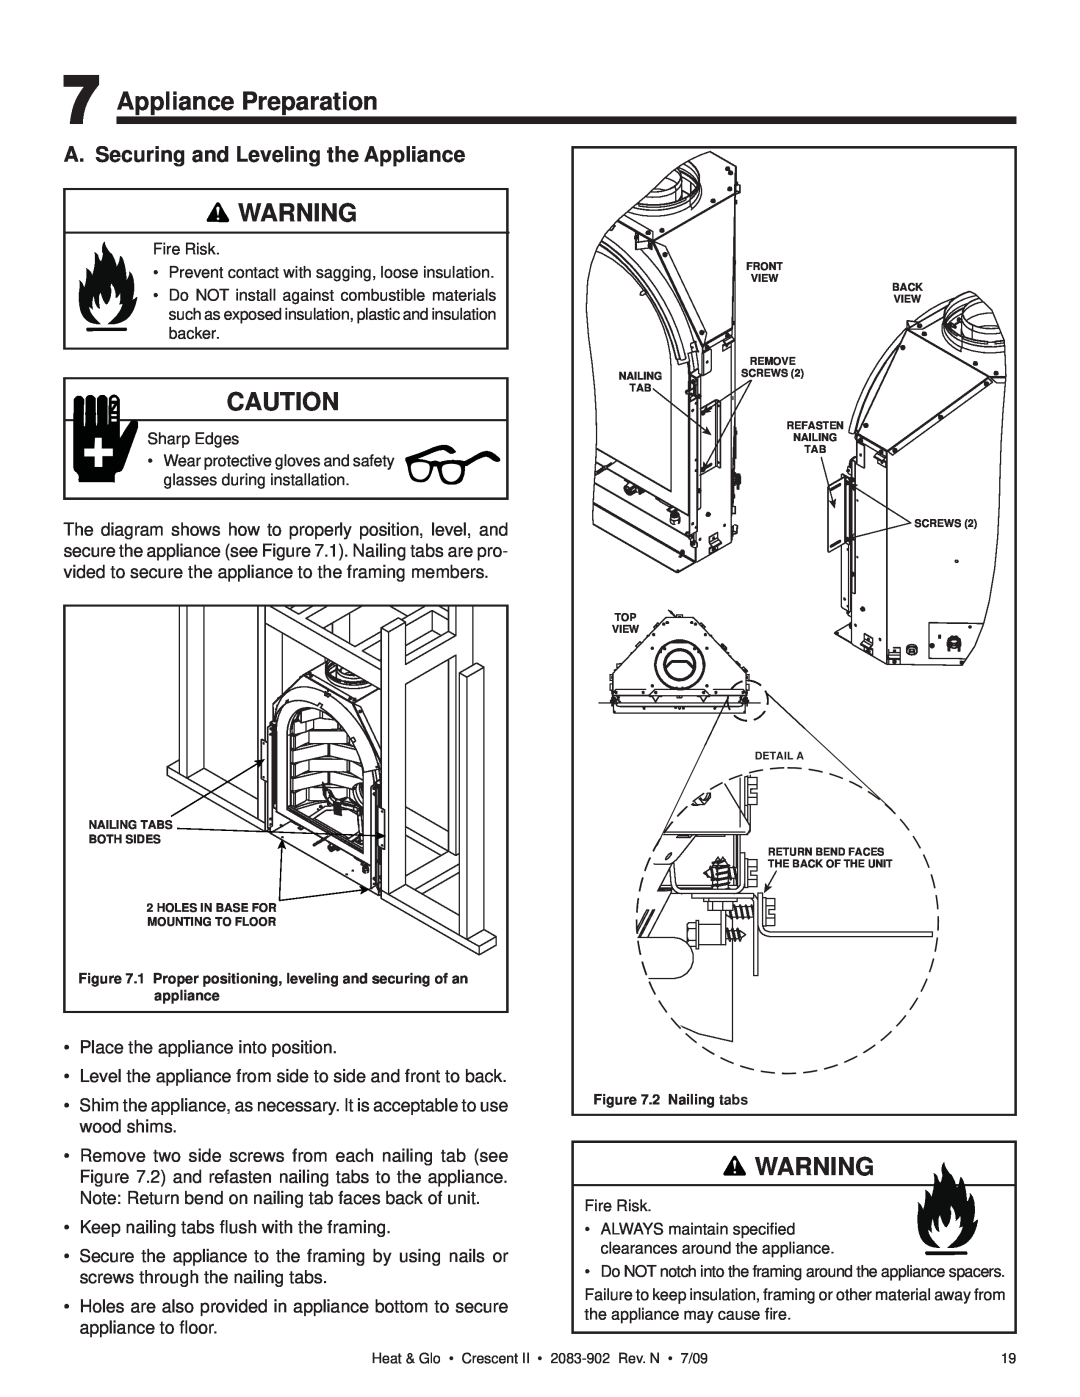 Heat & Glo LifeStyle CRESCENT II owner manual Appliance Preparation, A. Securing and Leveling the Appliance 